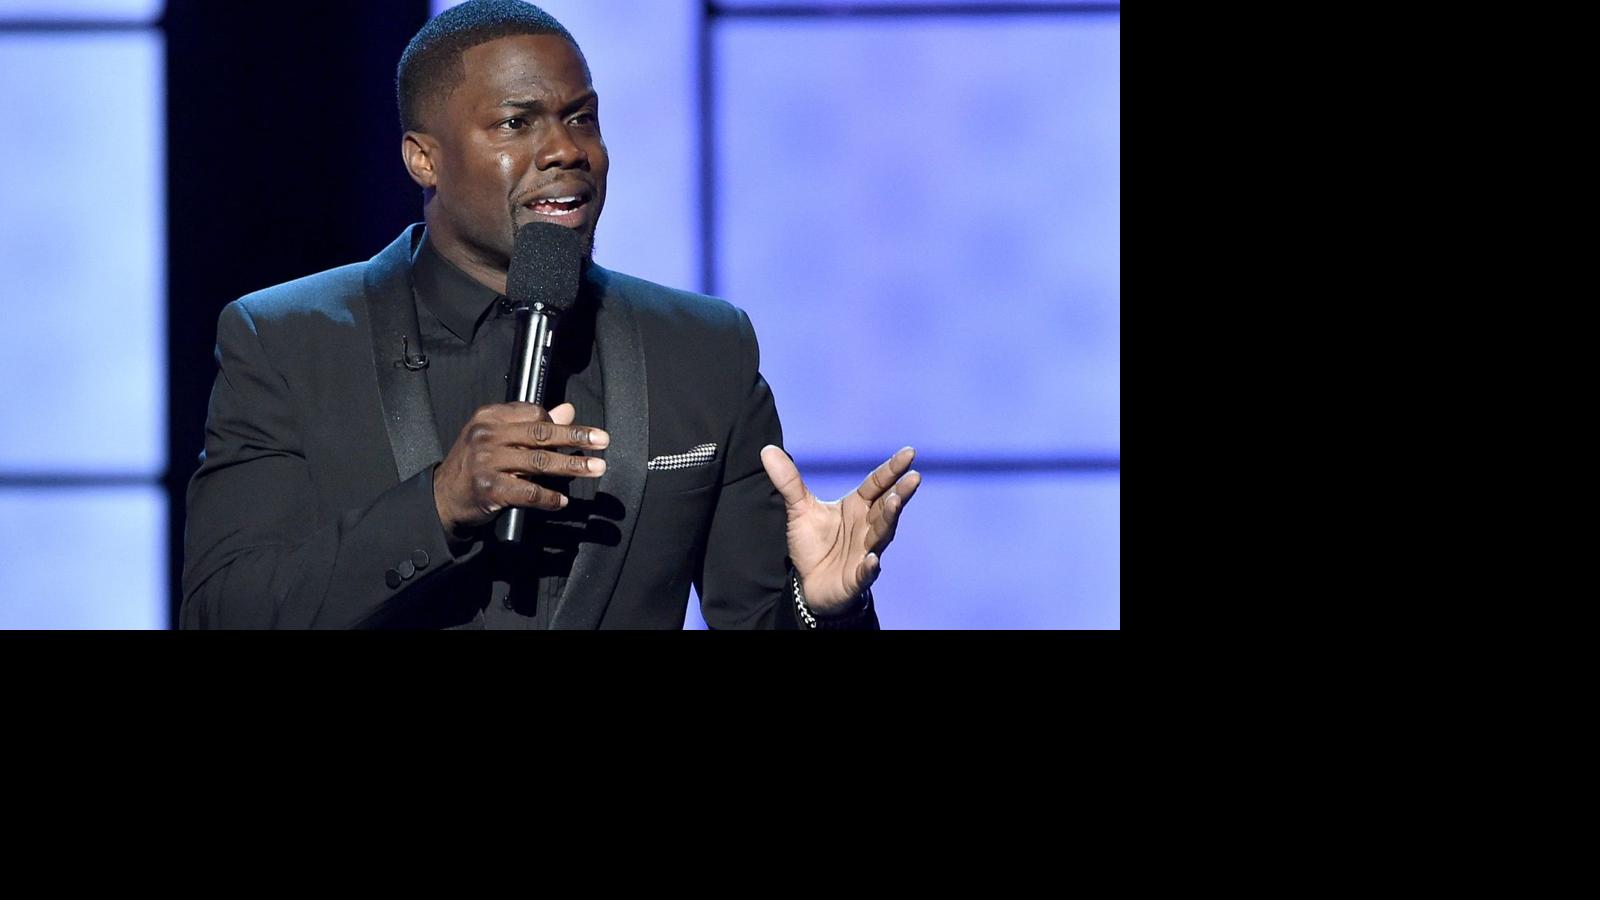 40 Best Pictures Kevin Hart Comedy Movies In Order GetHard with Mayo